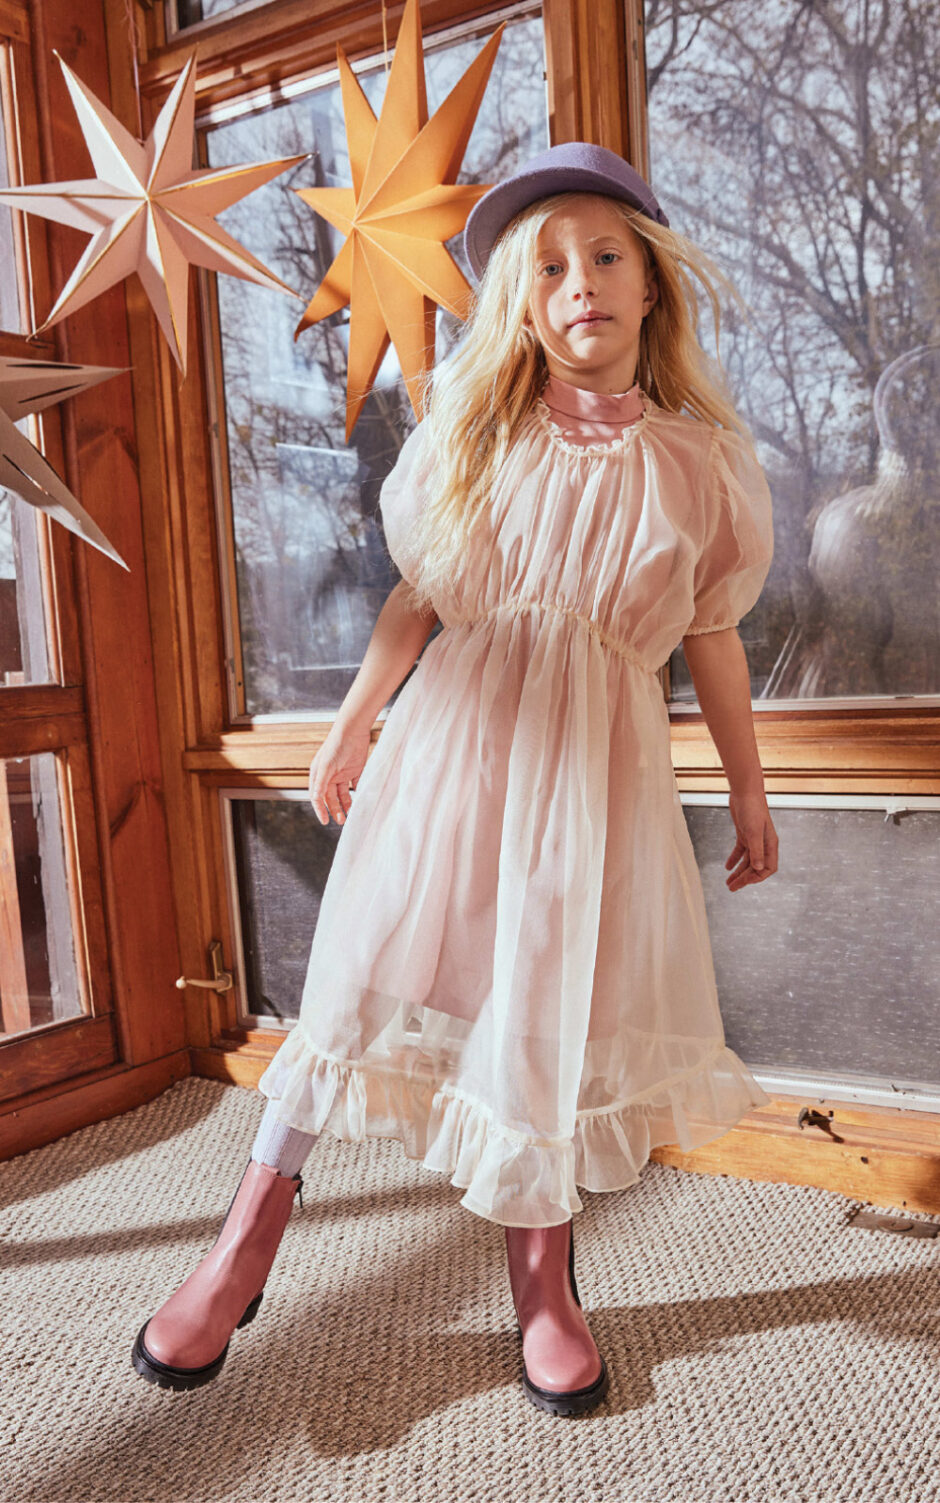 Colored by nature: onion scraps get turned into the dye for this darling dress.